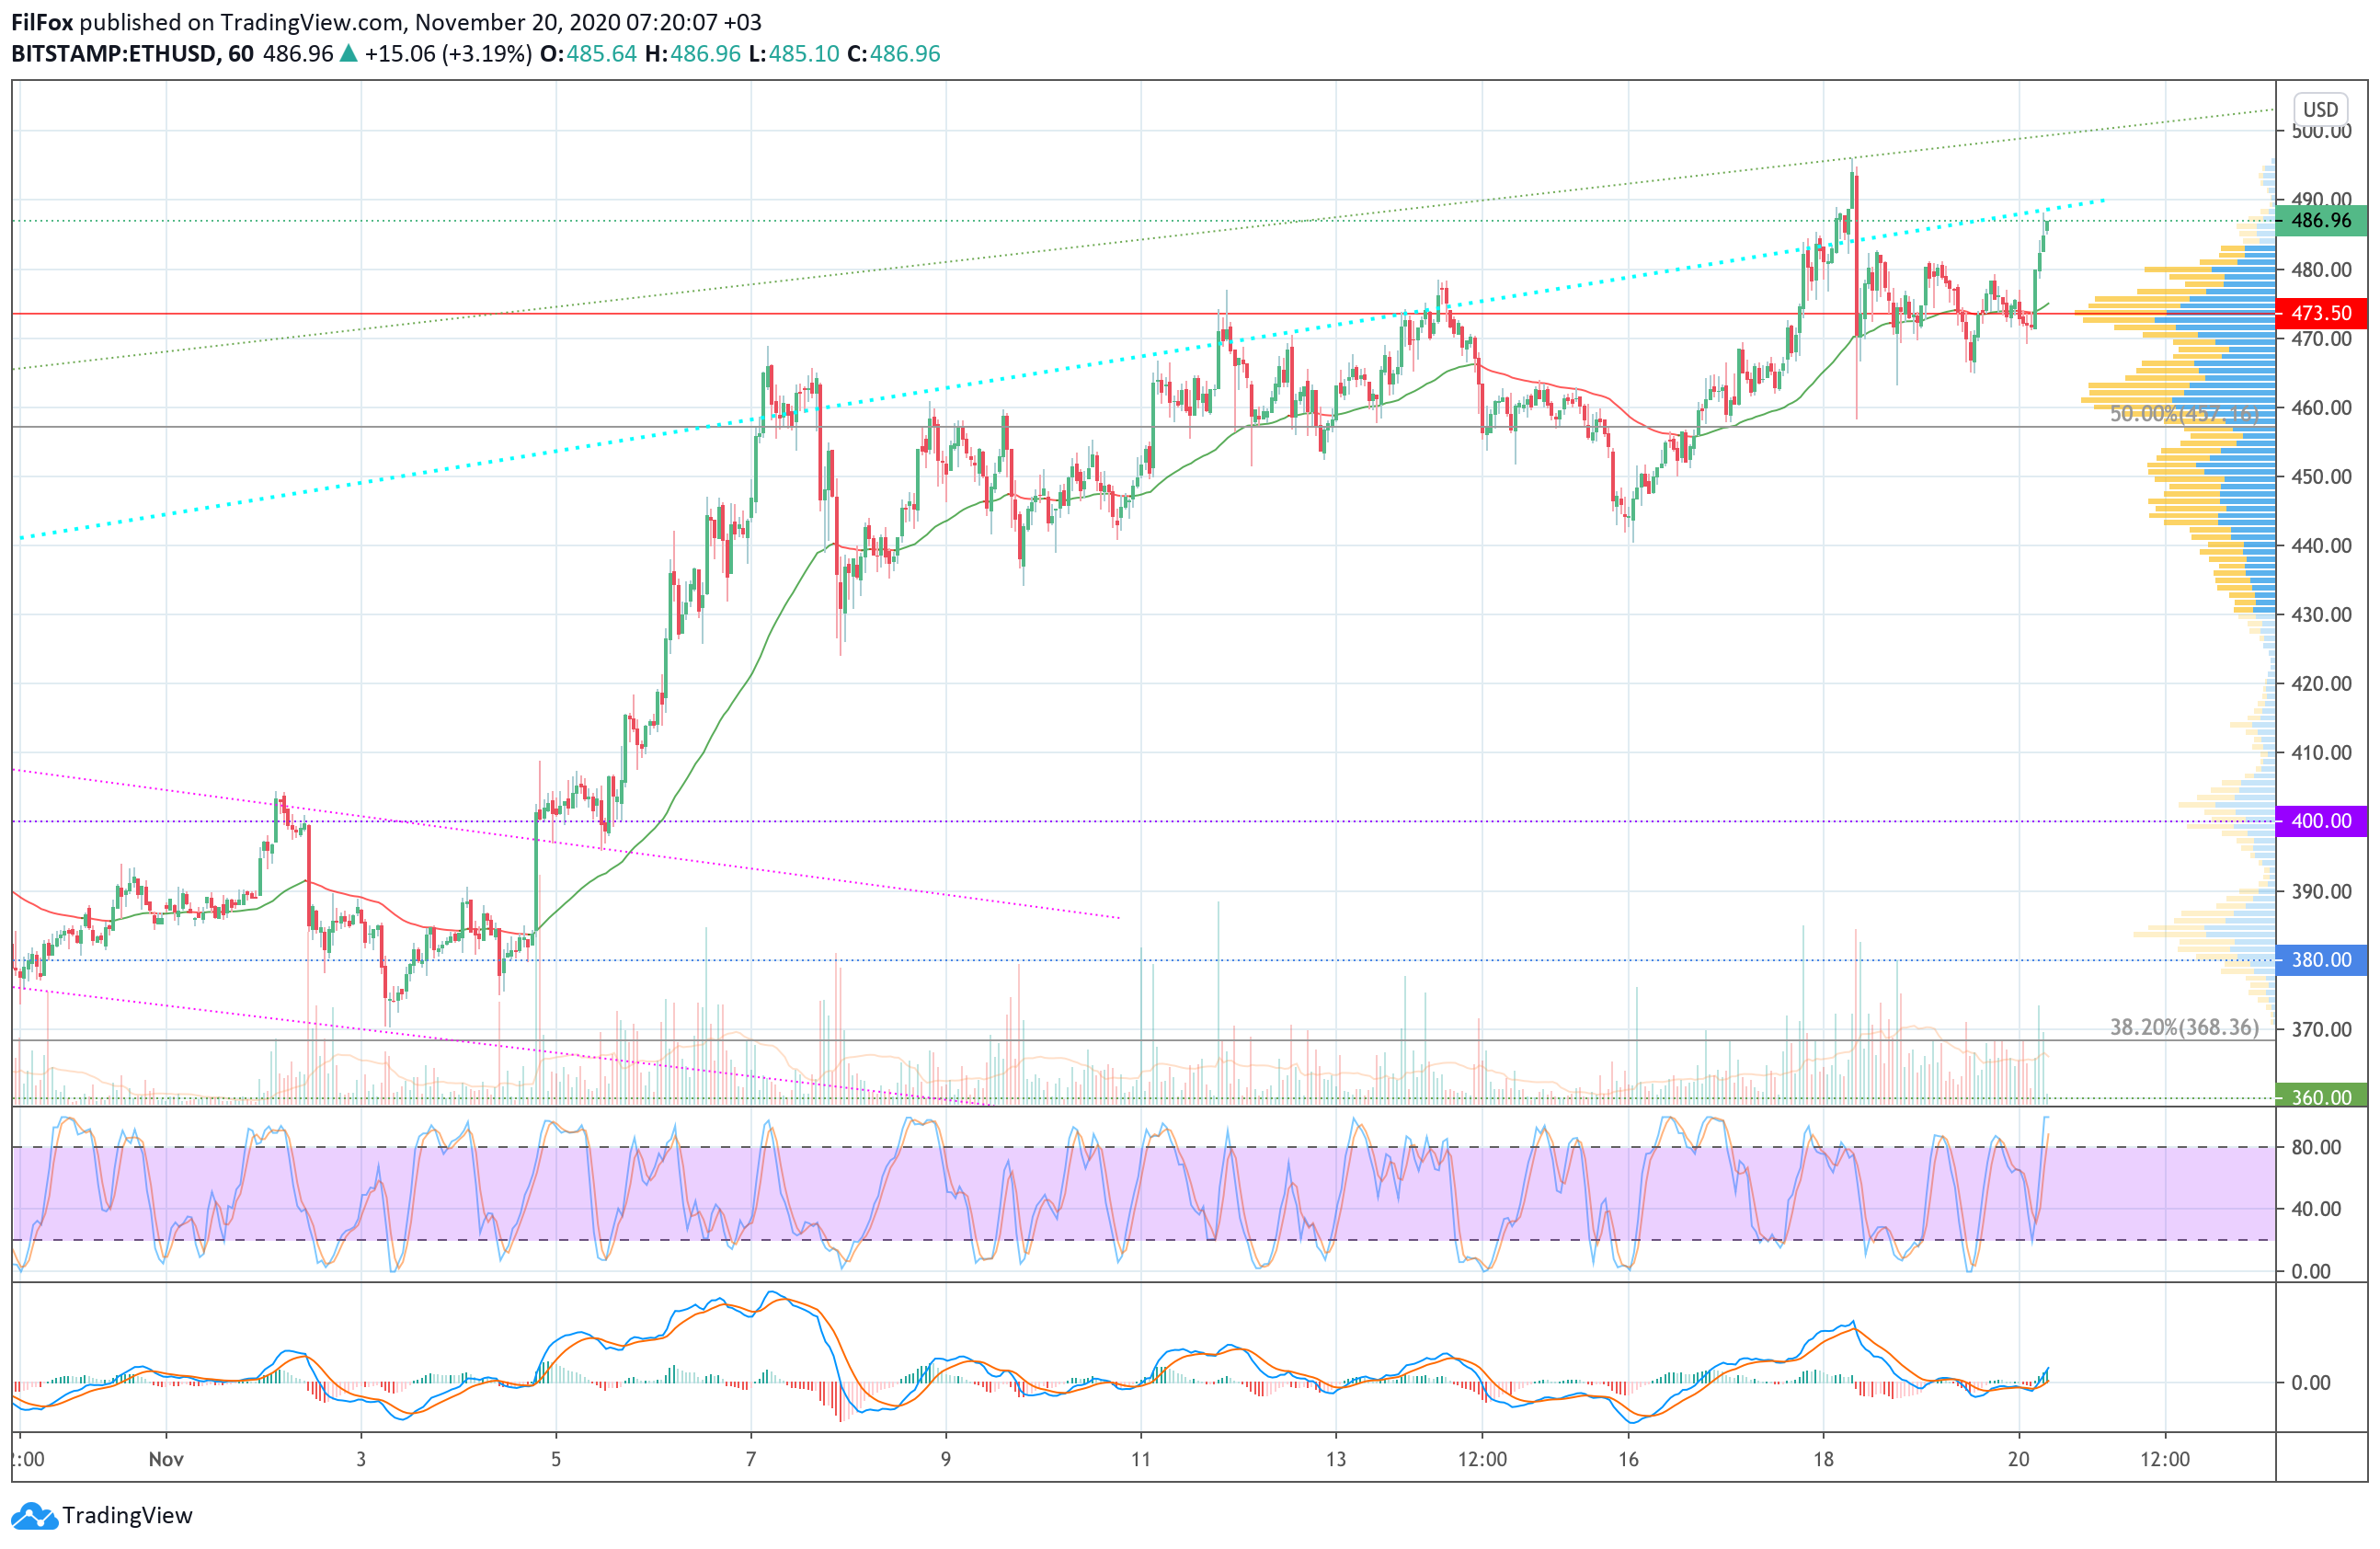 Analysis of the prices of Bitcoin, Ethereum, Ripple for 11/20/2020